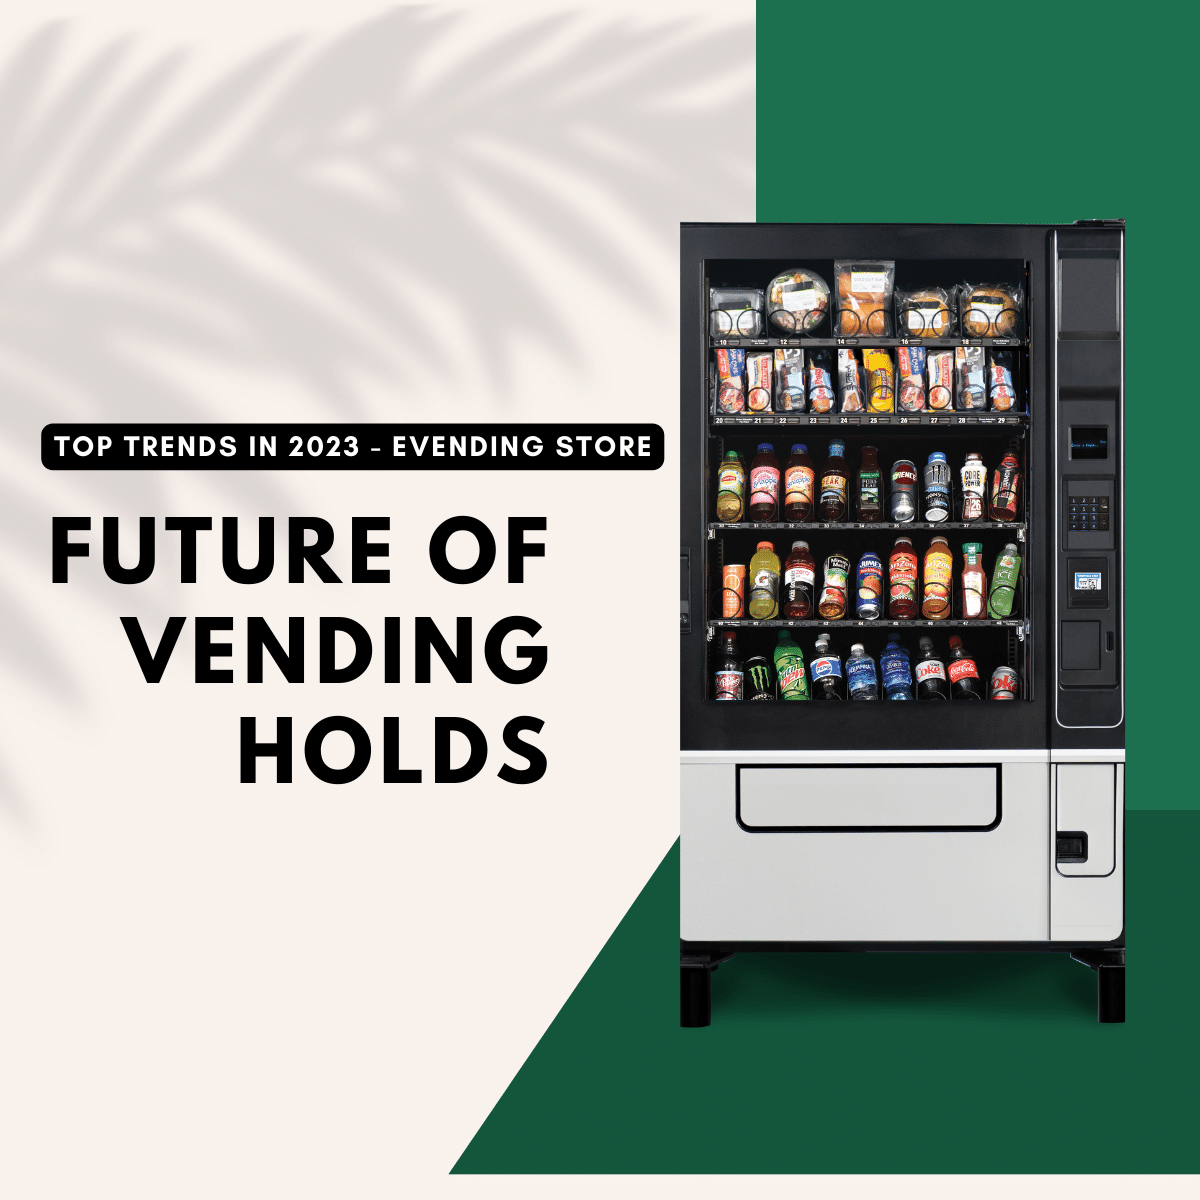 WHAT THE FUTURE OF VENDING HOLDS – TOP TRENDS IN 2023